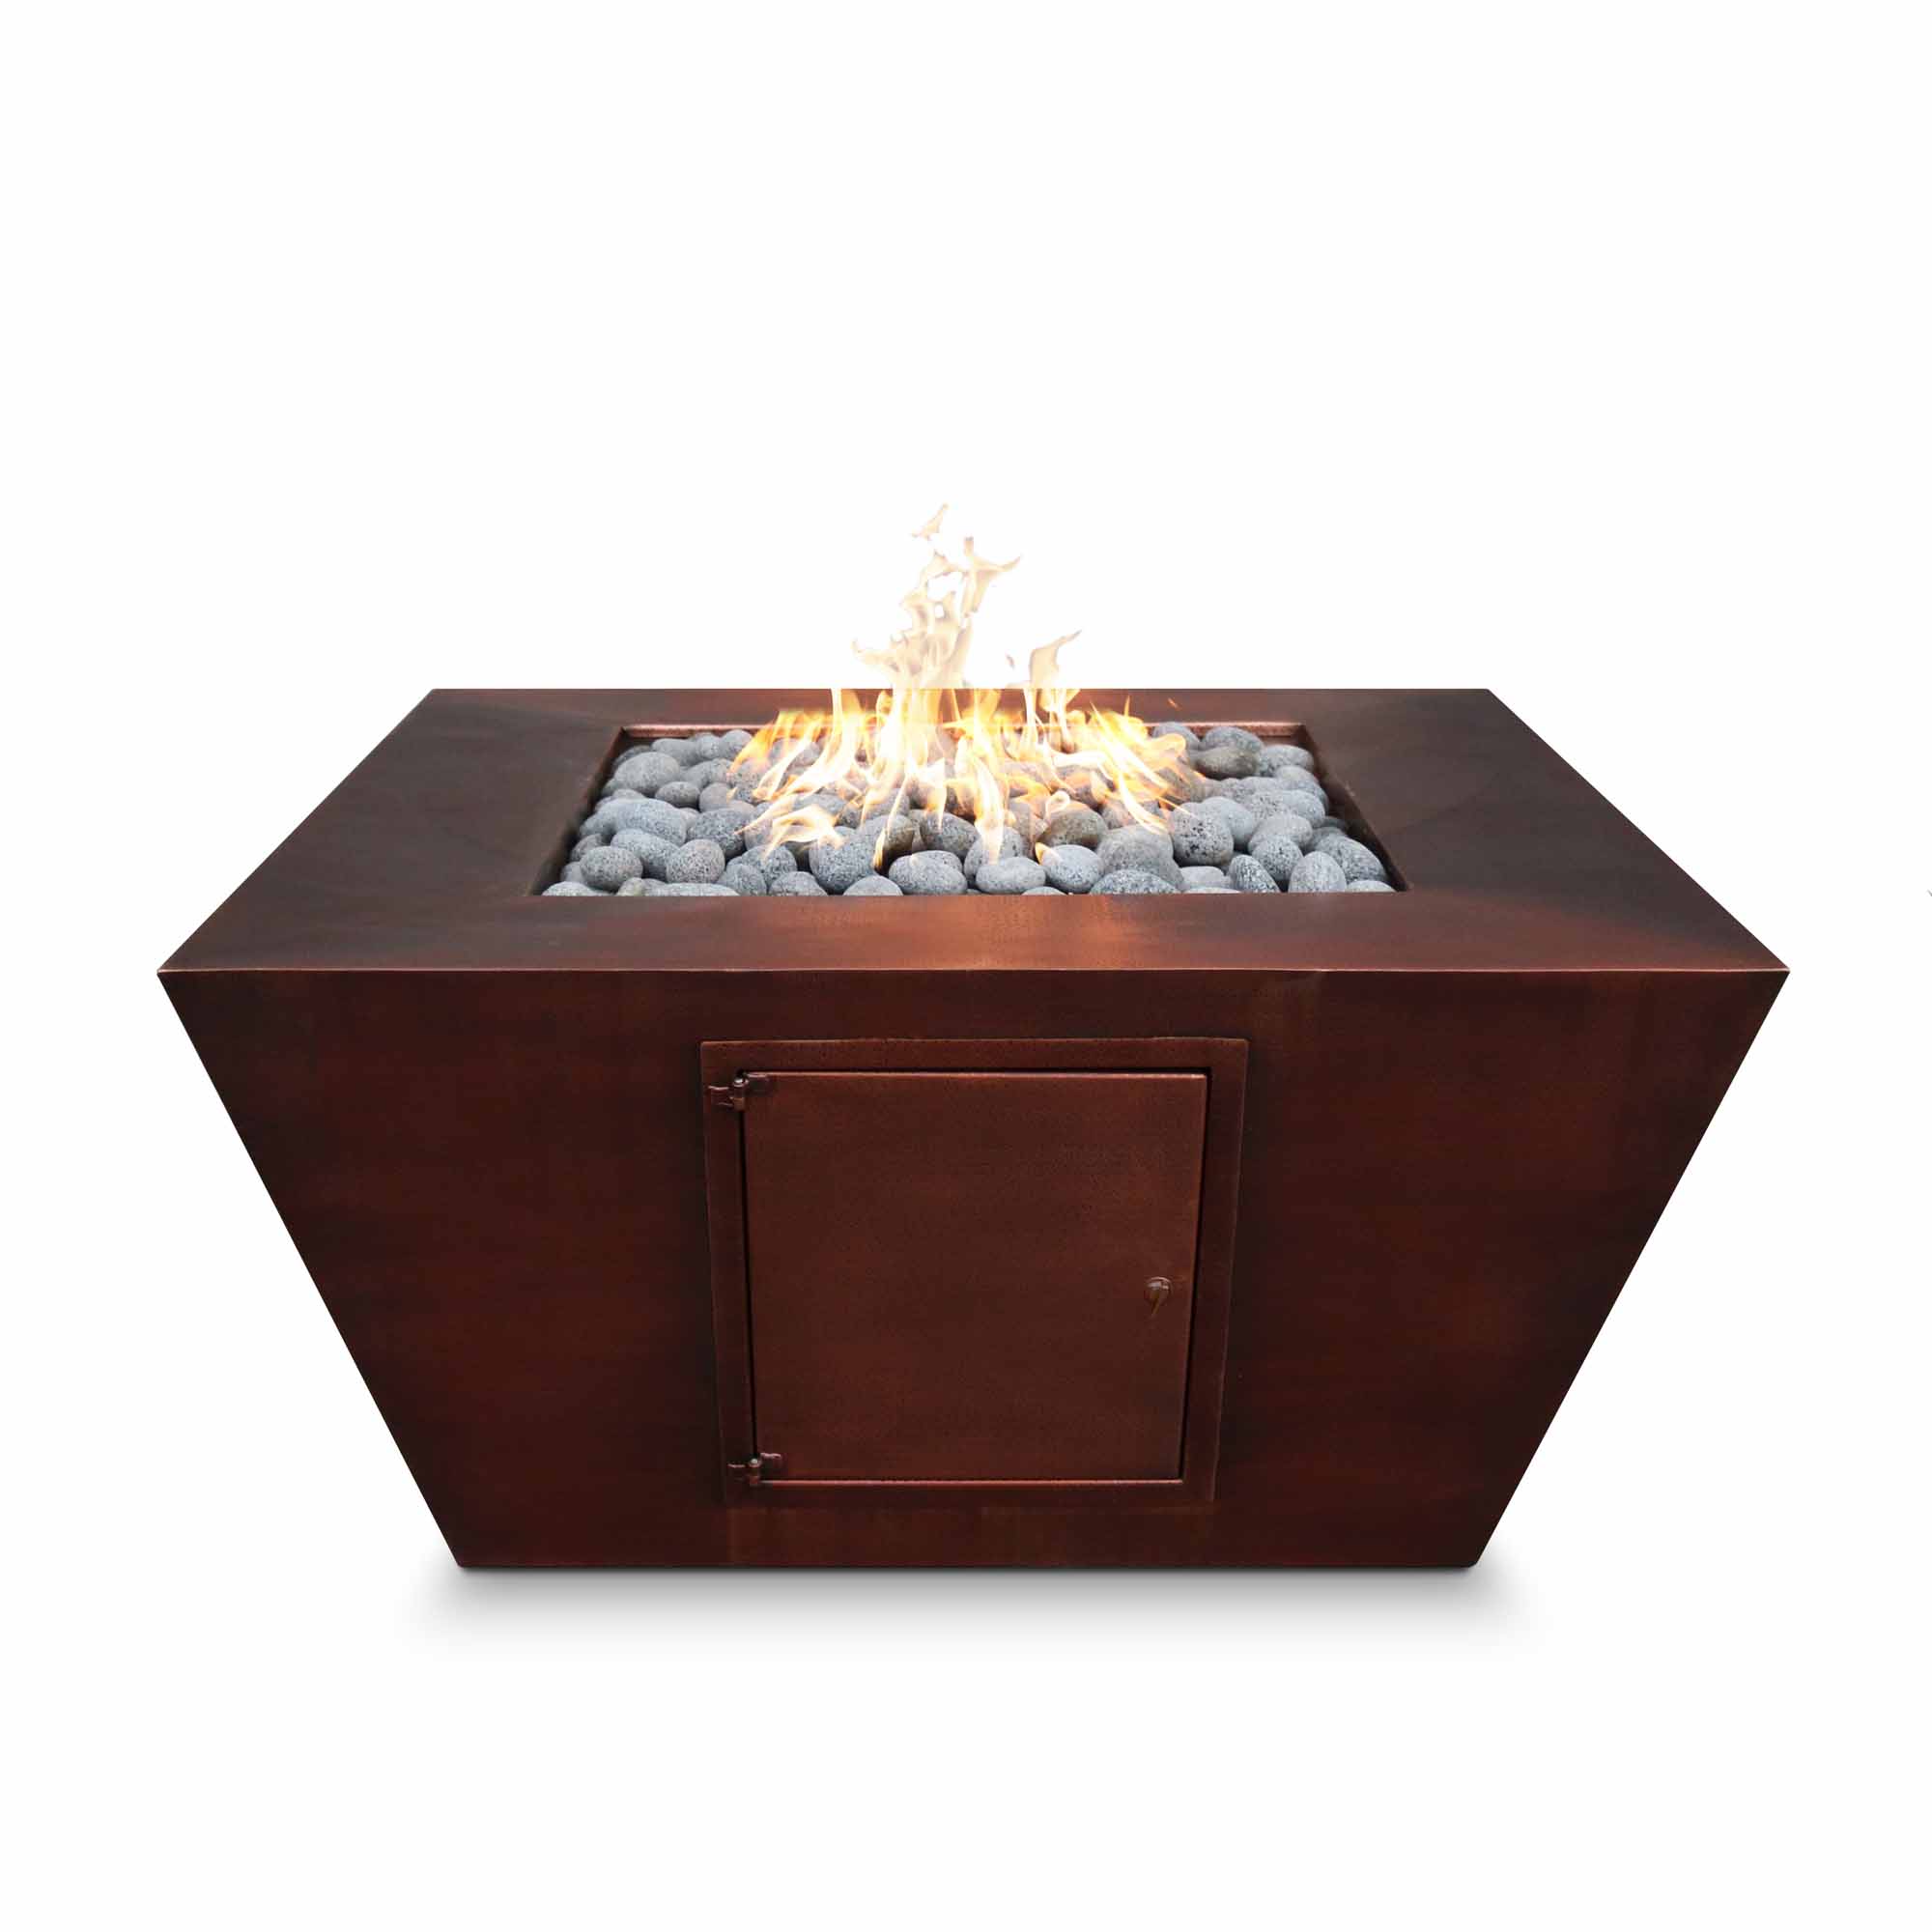 Redan Copper Fire Pit The Outdoor Plus, Hammered Copper Fire Pit Table